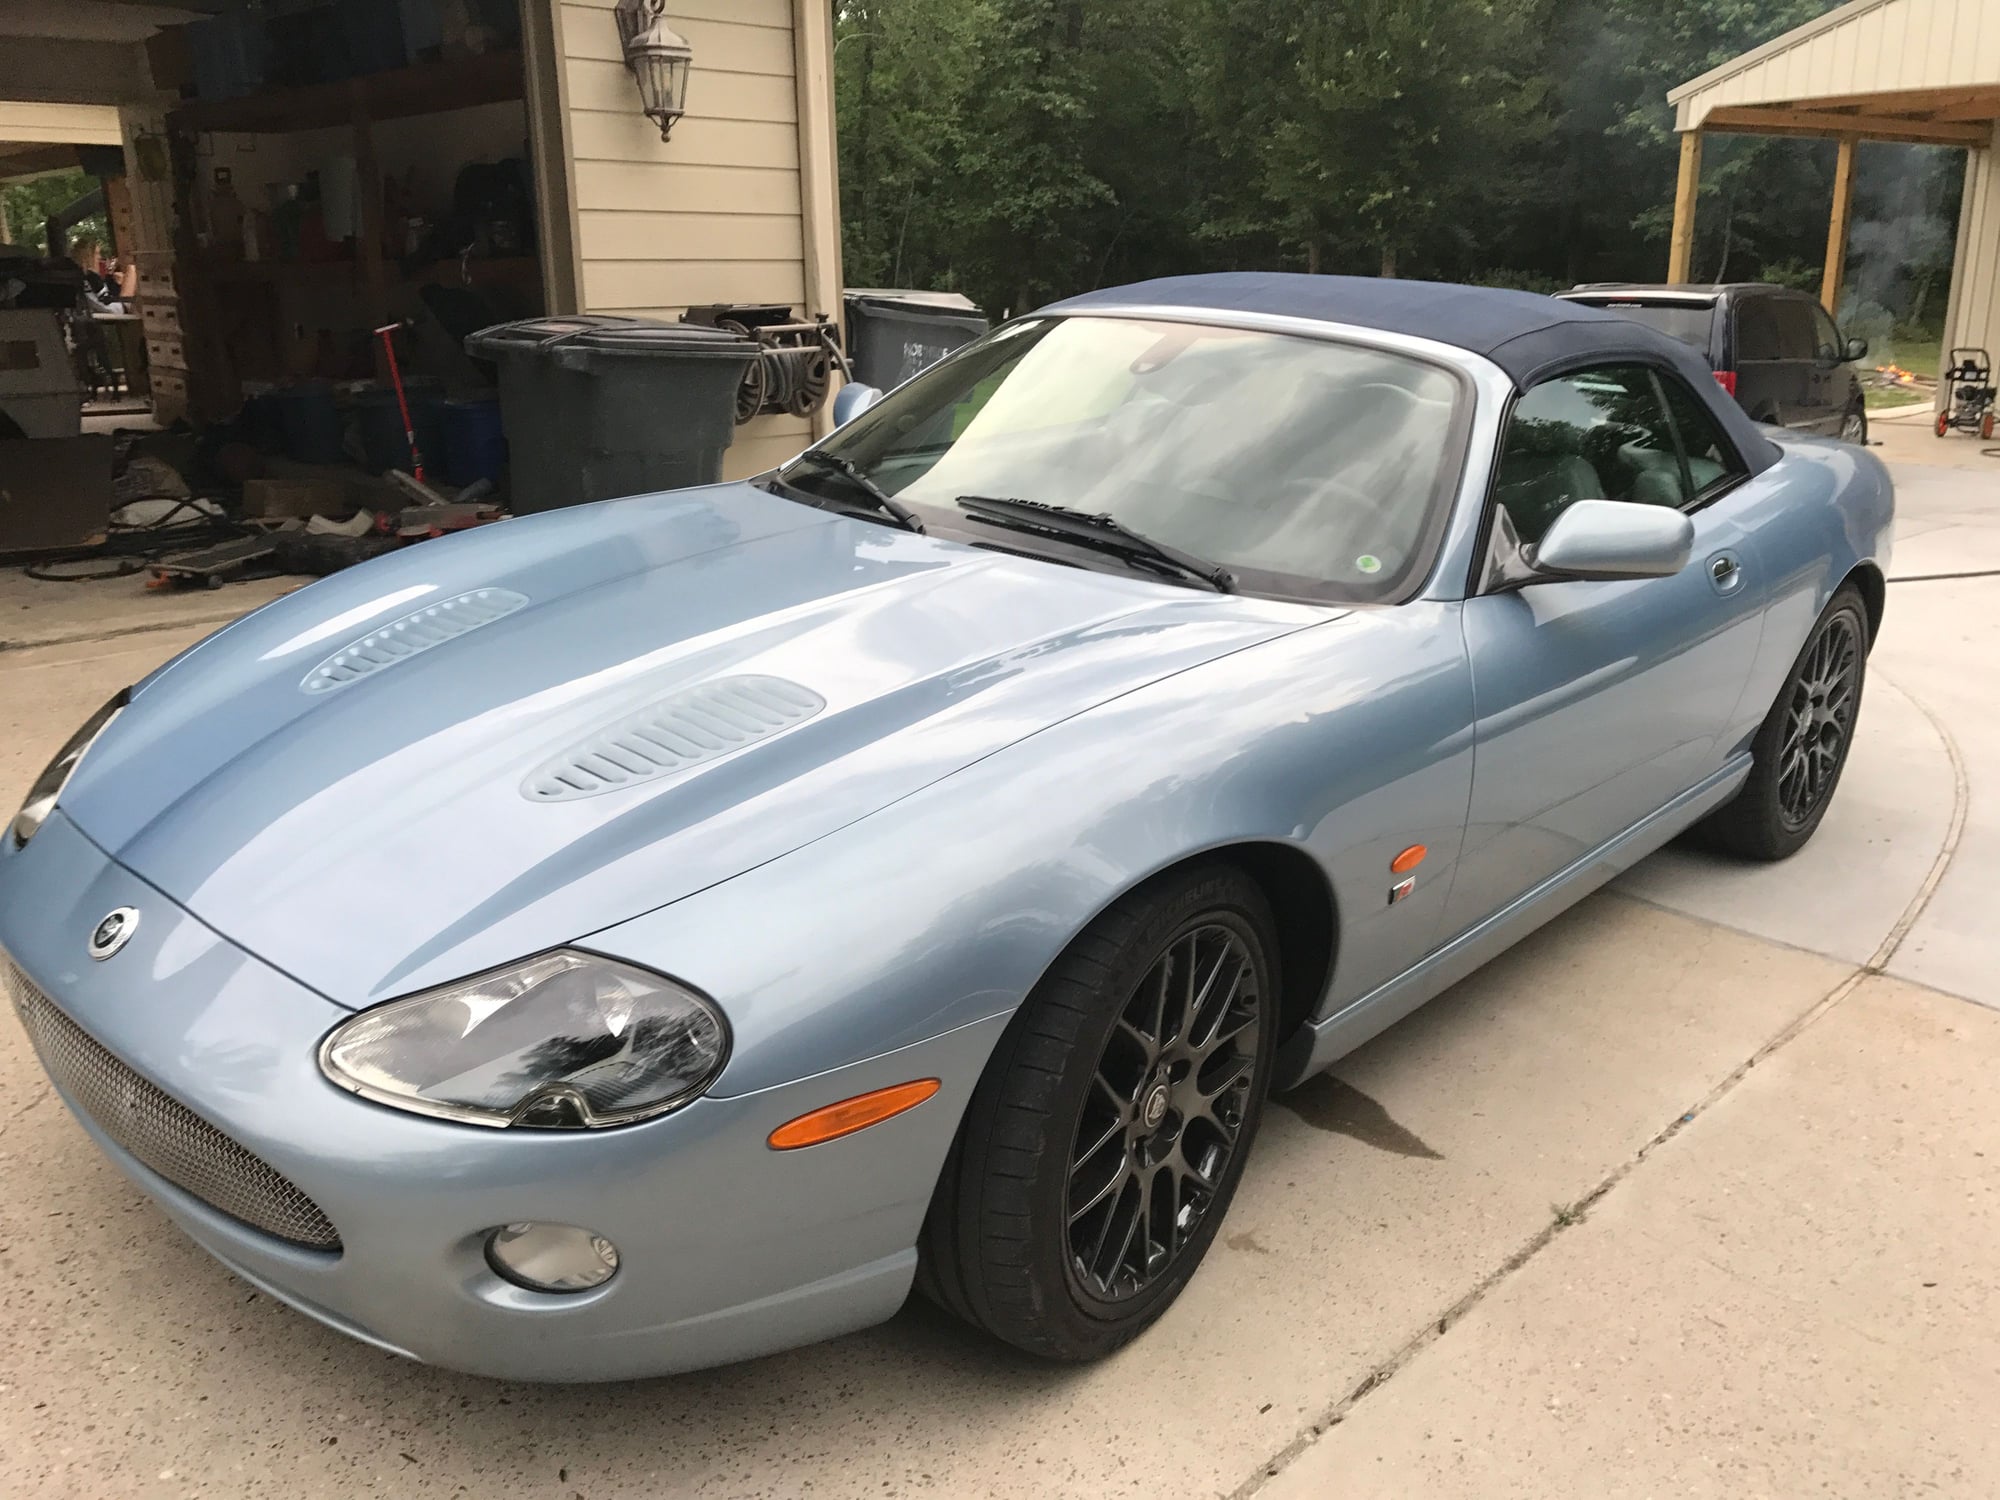 2006 Jaguar XKR - 2006 Jaguar XKR - Victory Edition - Used - VIN SAJDA42B063A44803 - 96,000 Miles - 8 cyl - 2WD - Automatic - Convertible - Blue - Huffman, TX 77336, United States